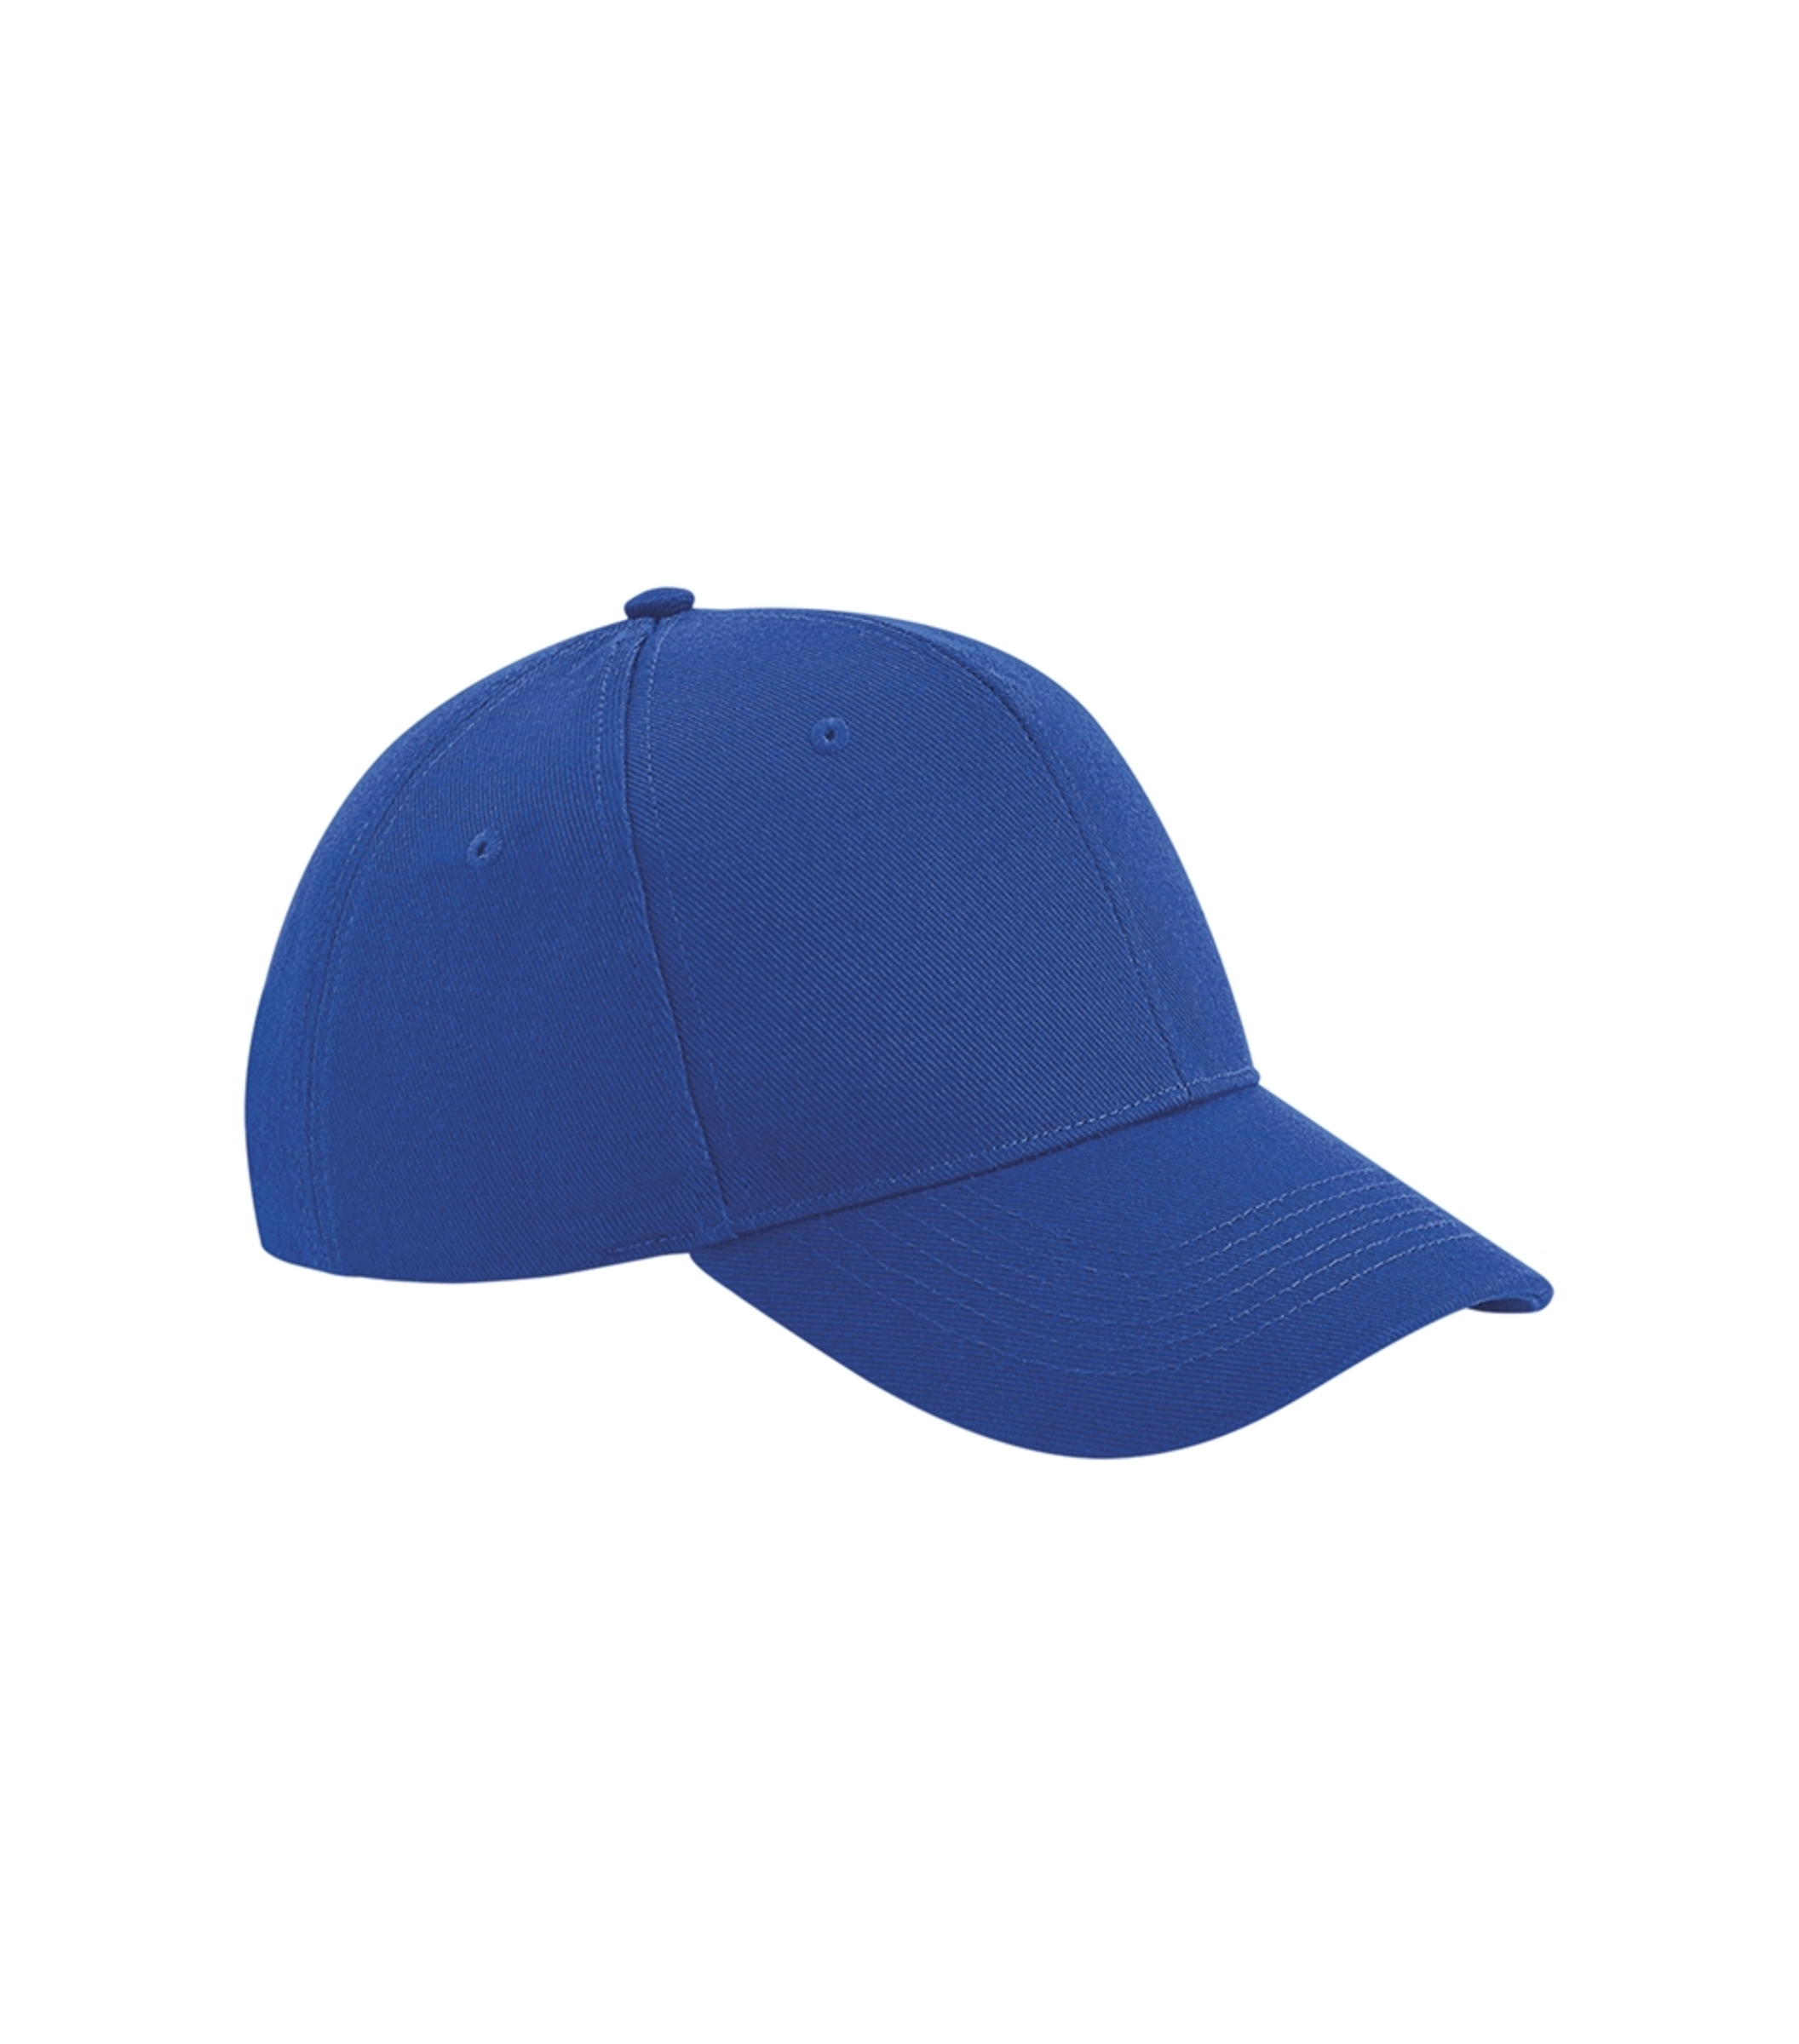 Beechfield Ultimate 6 Panel Cap - Bright Royal - One Size